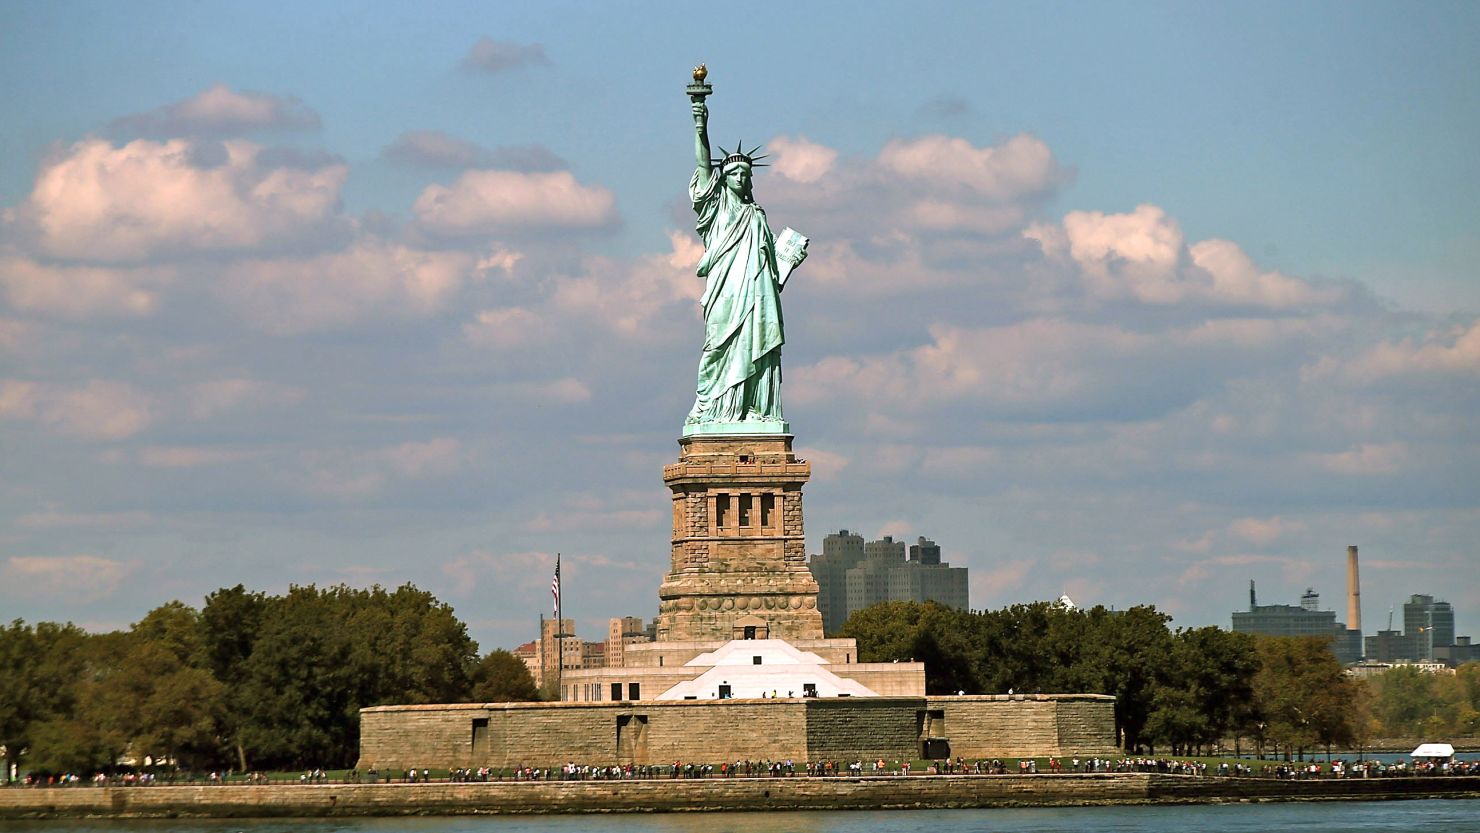 The Statue of Liberty, one of New York's premiere tourist attractions, is viewed from the Staten Island Ferry on September 30, 2013.
(Photo by Spencer Platt/Getty Images)